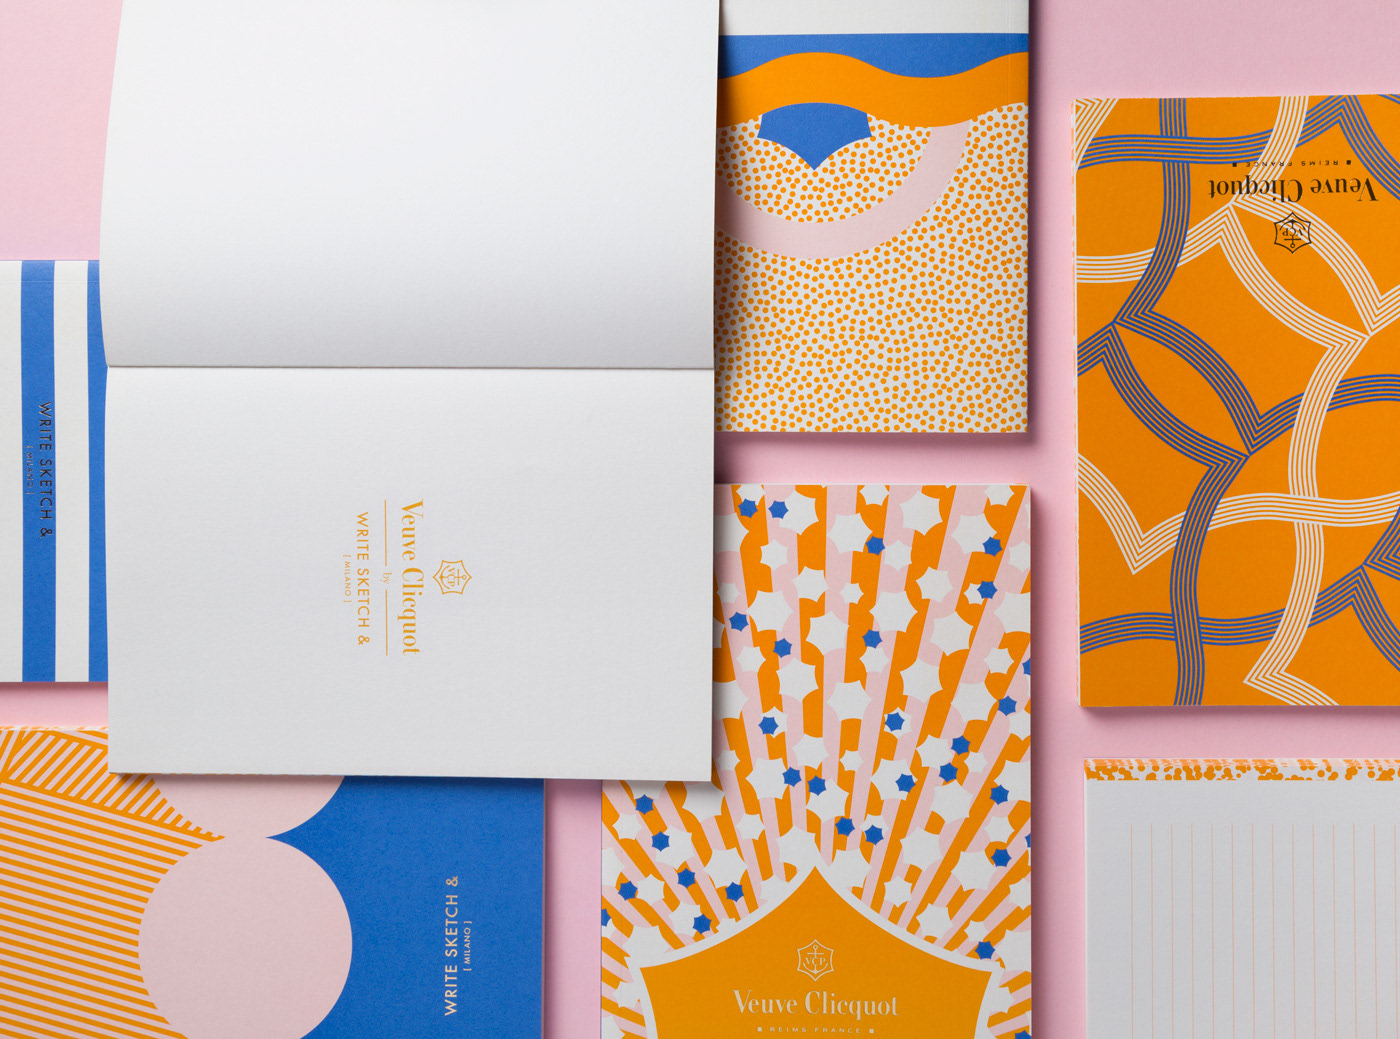 Champagne notebooks Veuve Clicquot Stationery luxury colors print design  paper notebook